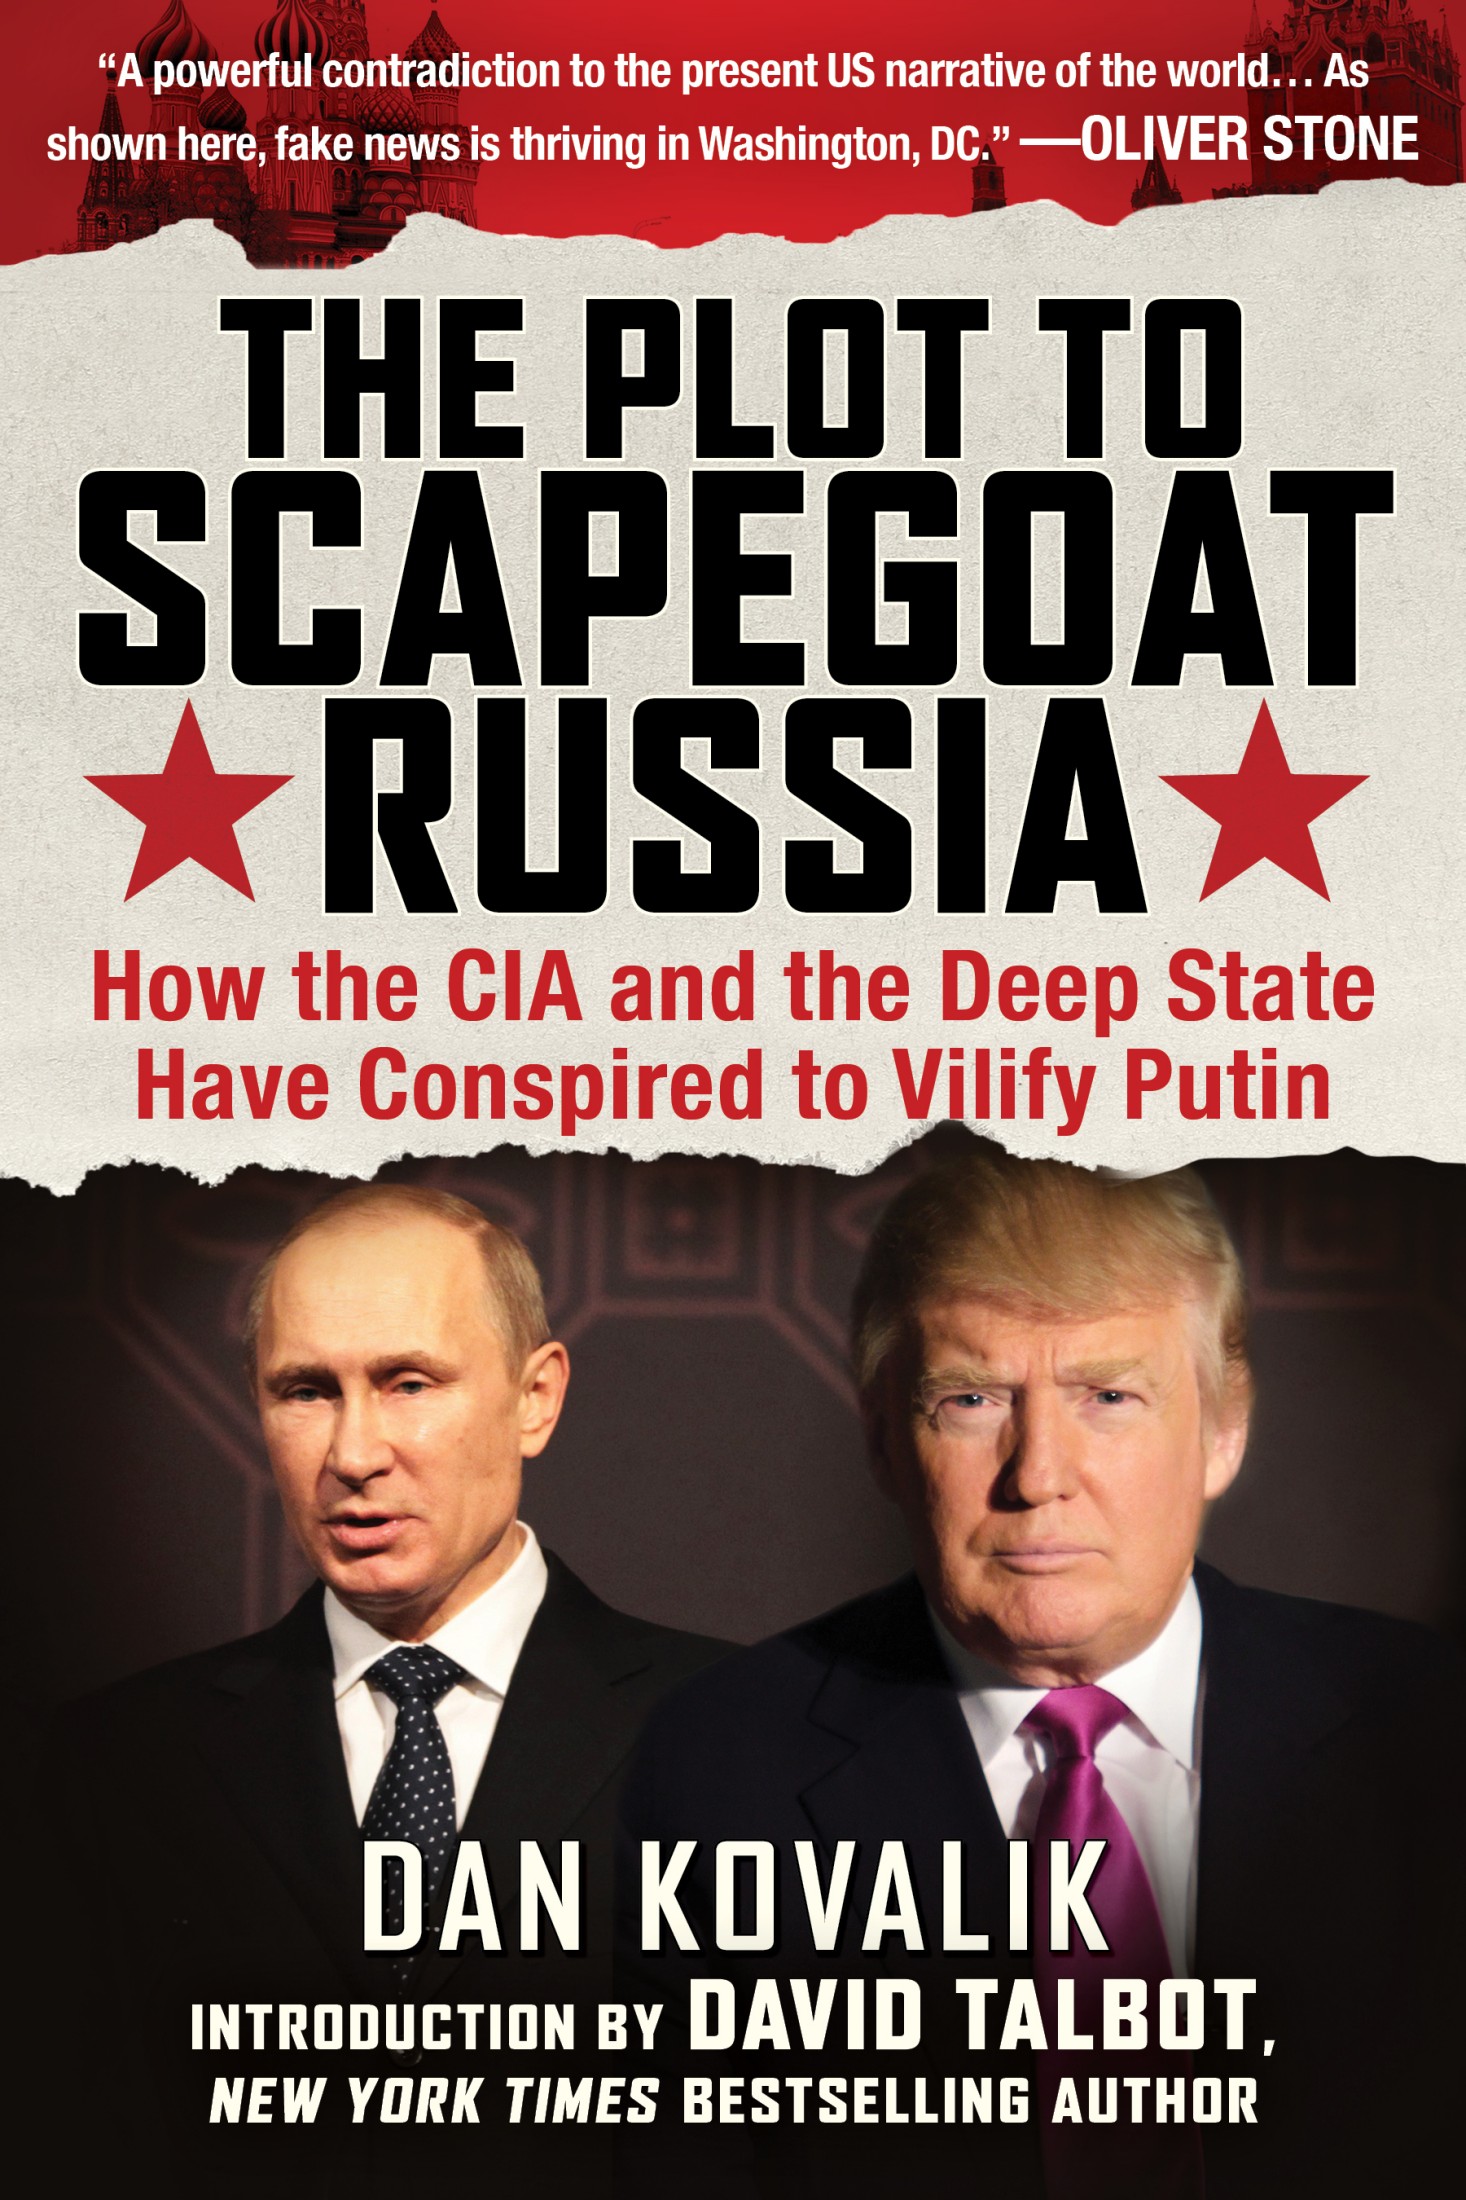 The Plot to Scapegoat Russia: How the CIA and the Deep State Have Conspired to Vilify Russia